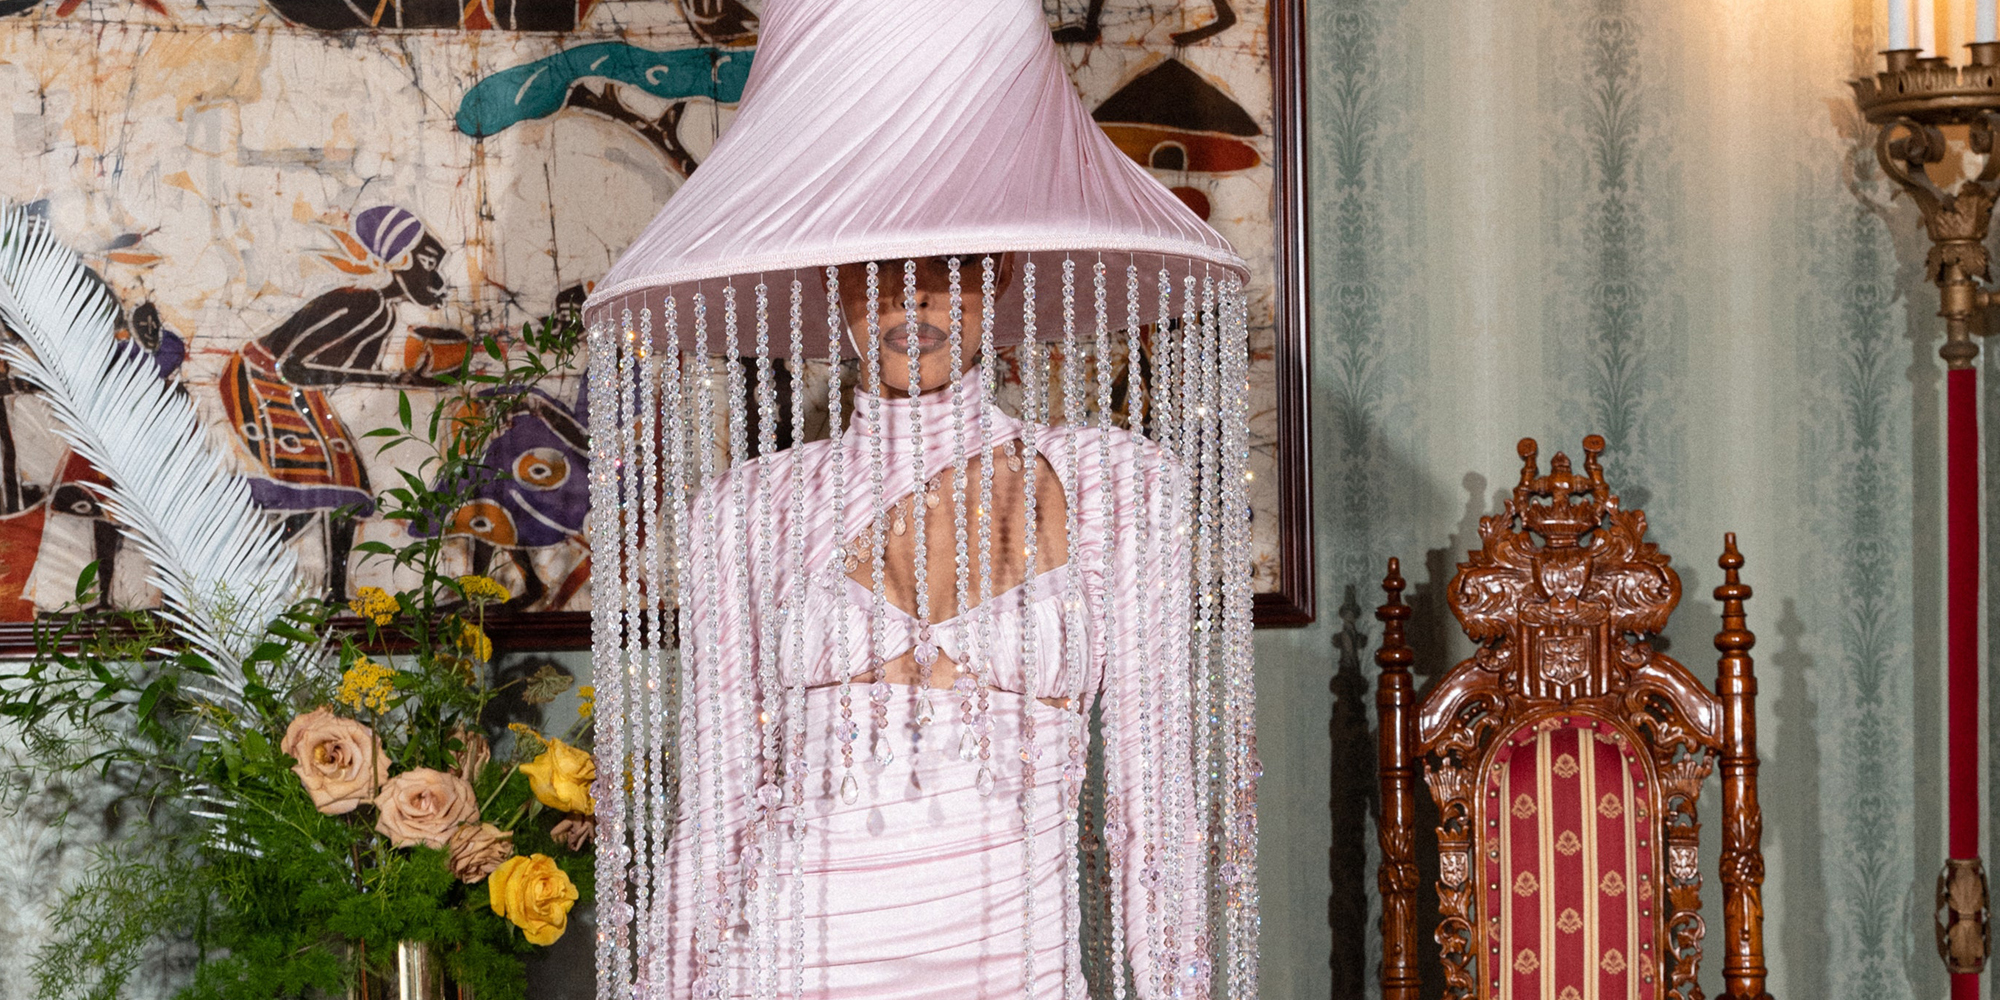 PYER MOSS FALL 2021 HAUTE COUTURE COLLECTION